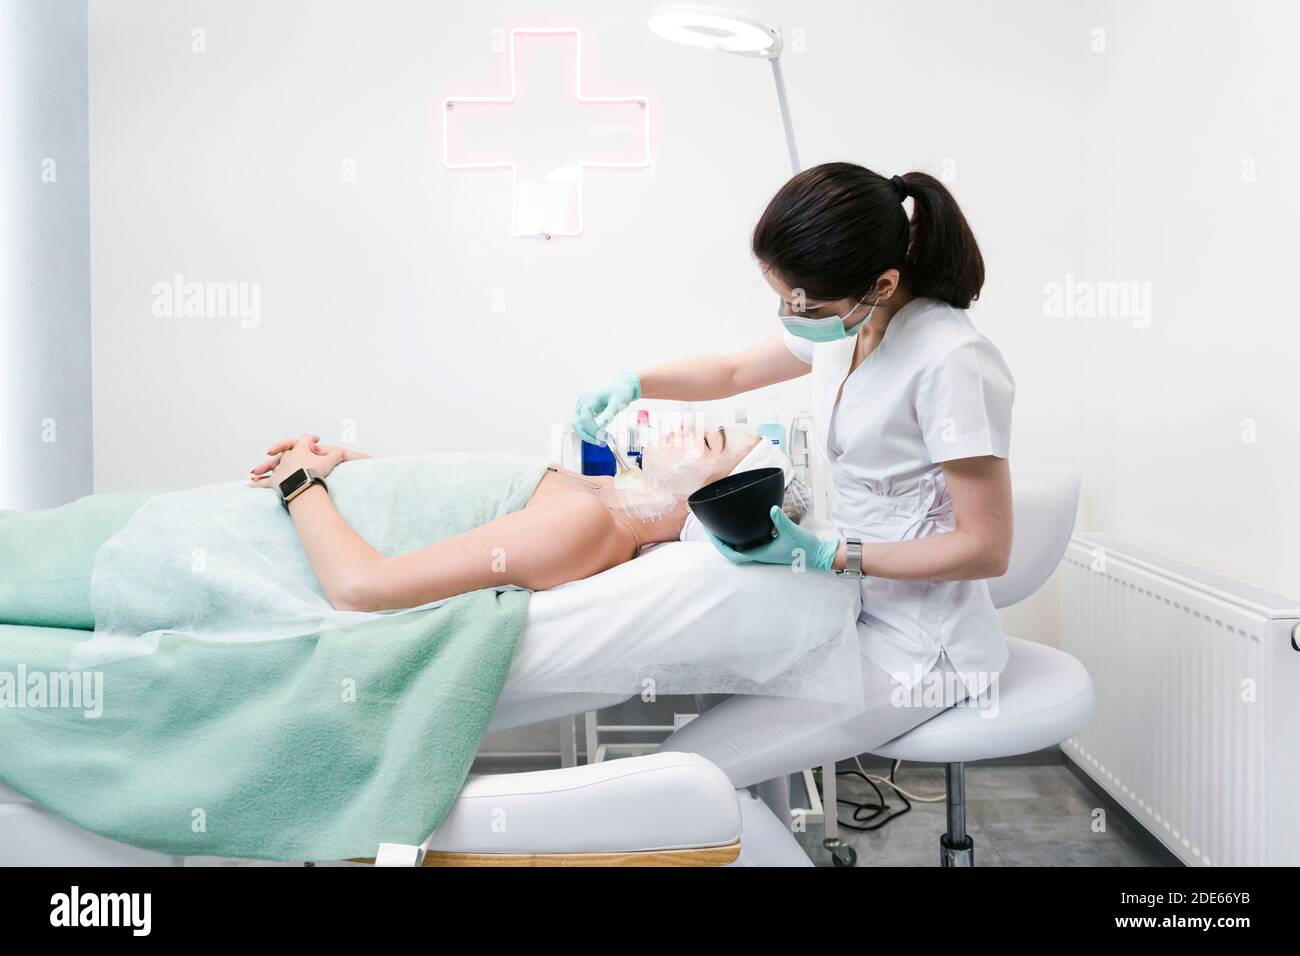 The young female client of cosmetic salon having a face cleaning procedure. The doctor cosmetologist cleaning skin. Concepts of skin care and beauty s Stock Photo